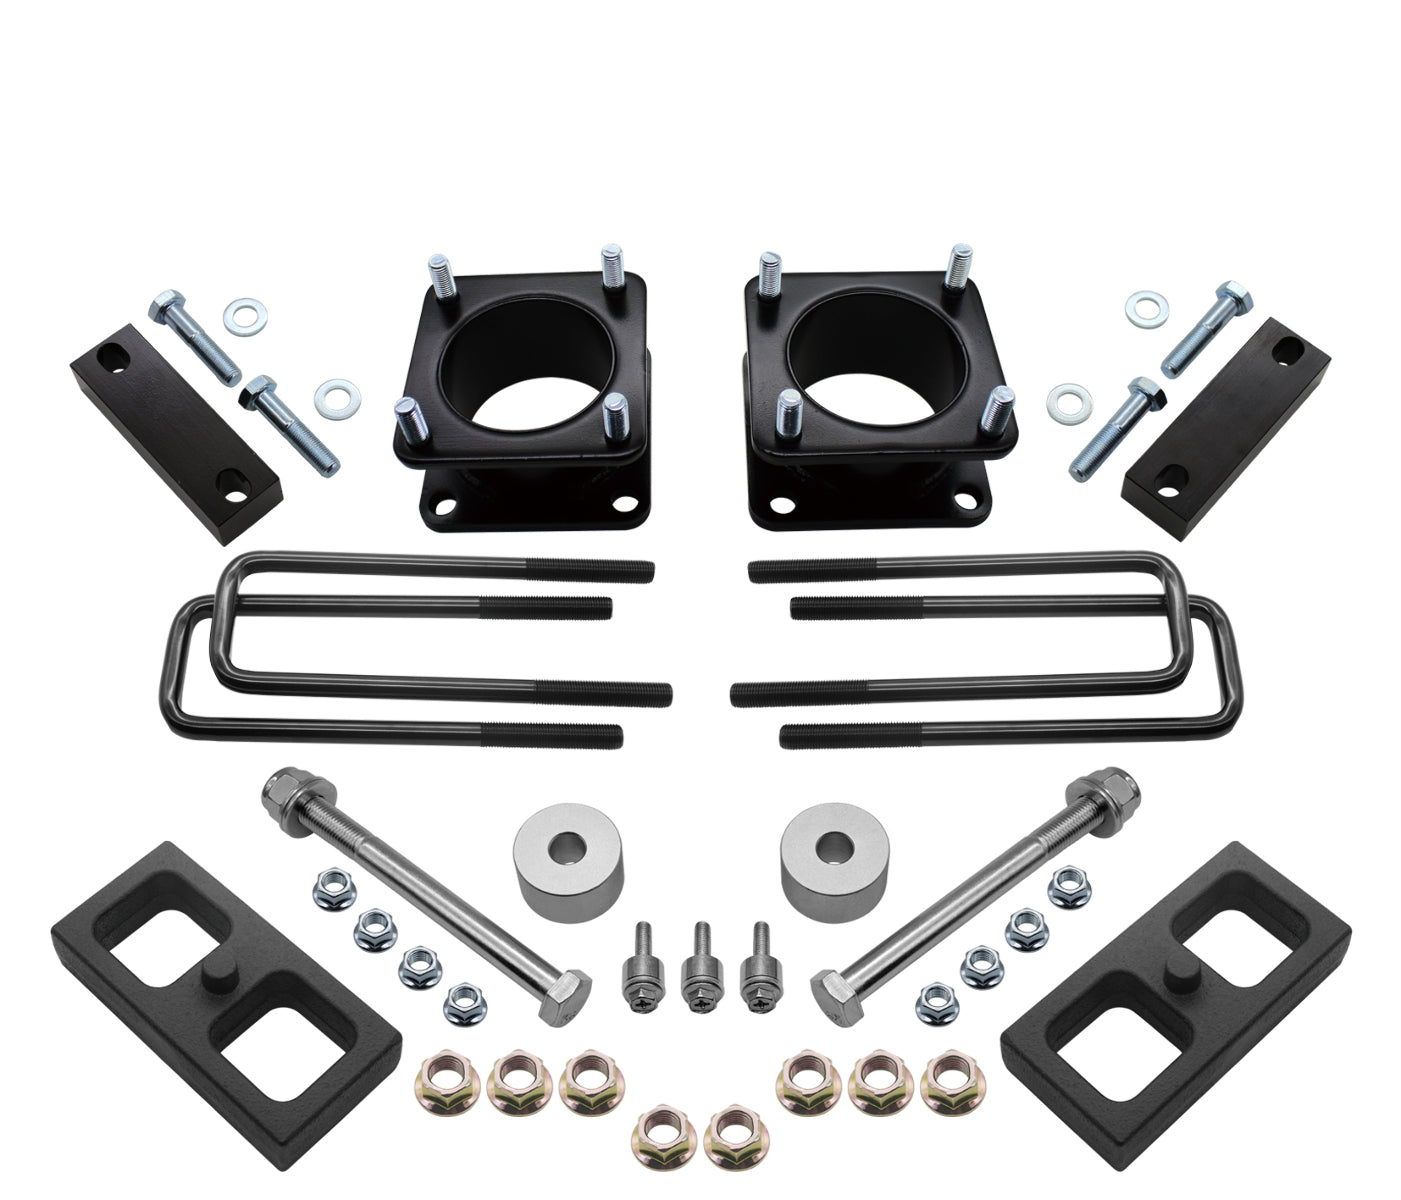 Bison Off Road 3''F / 1''R Lift Kit For For Toyota Tundra 2007-2021